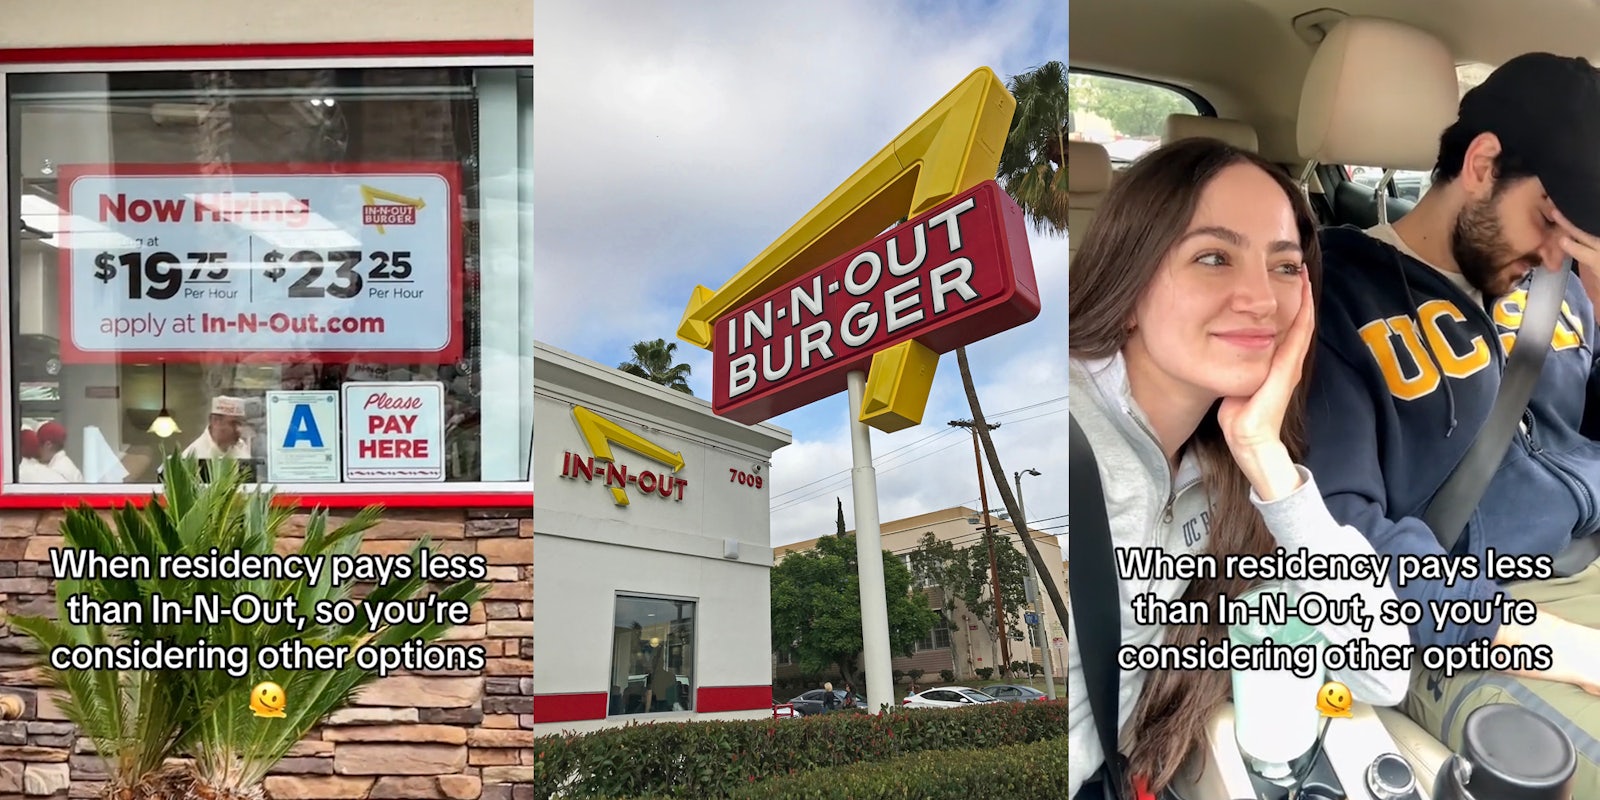 In-N-Out building with sign in window 'Now Hiring $19.75 per hour $23.25 per hour' with caption 'When residency pays less than In-N-Out, so you're considering other options' (l) In-N-Out sign with building (c) couple in car with caption 'When residency pays less than In-N-Out, so you're considering other options' (r)